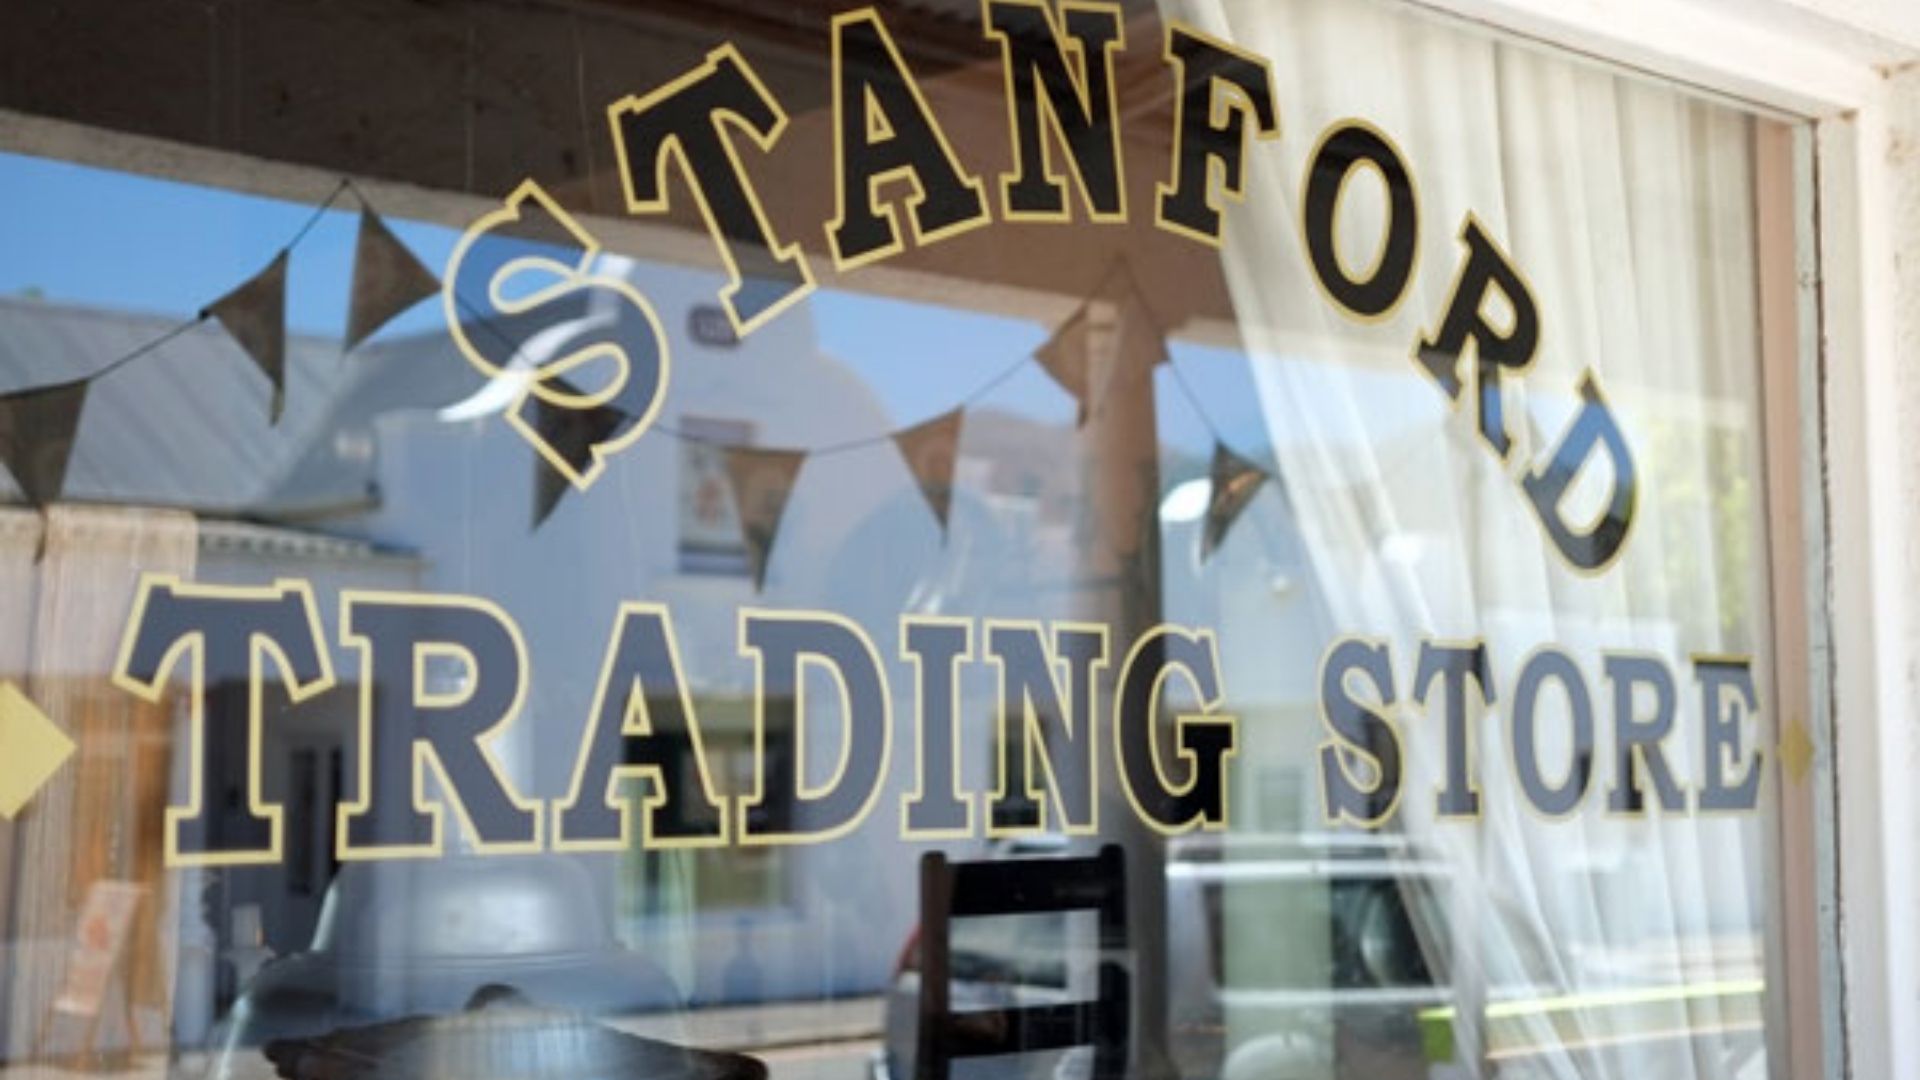 Stanford Trading Store